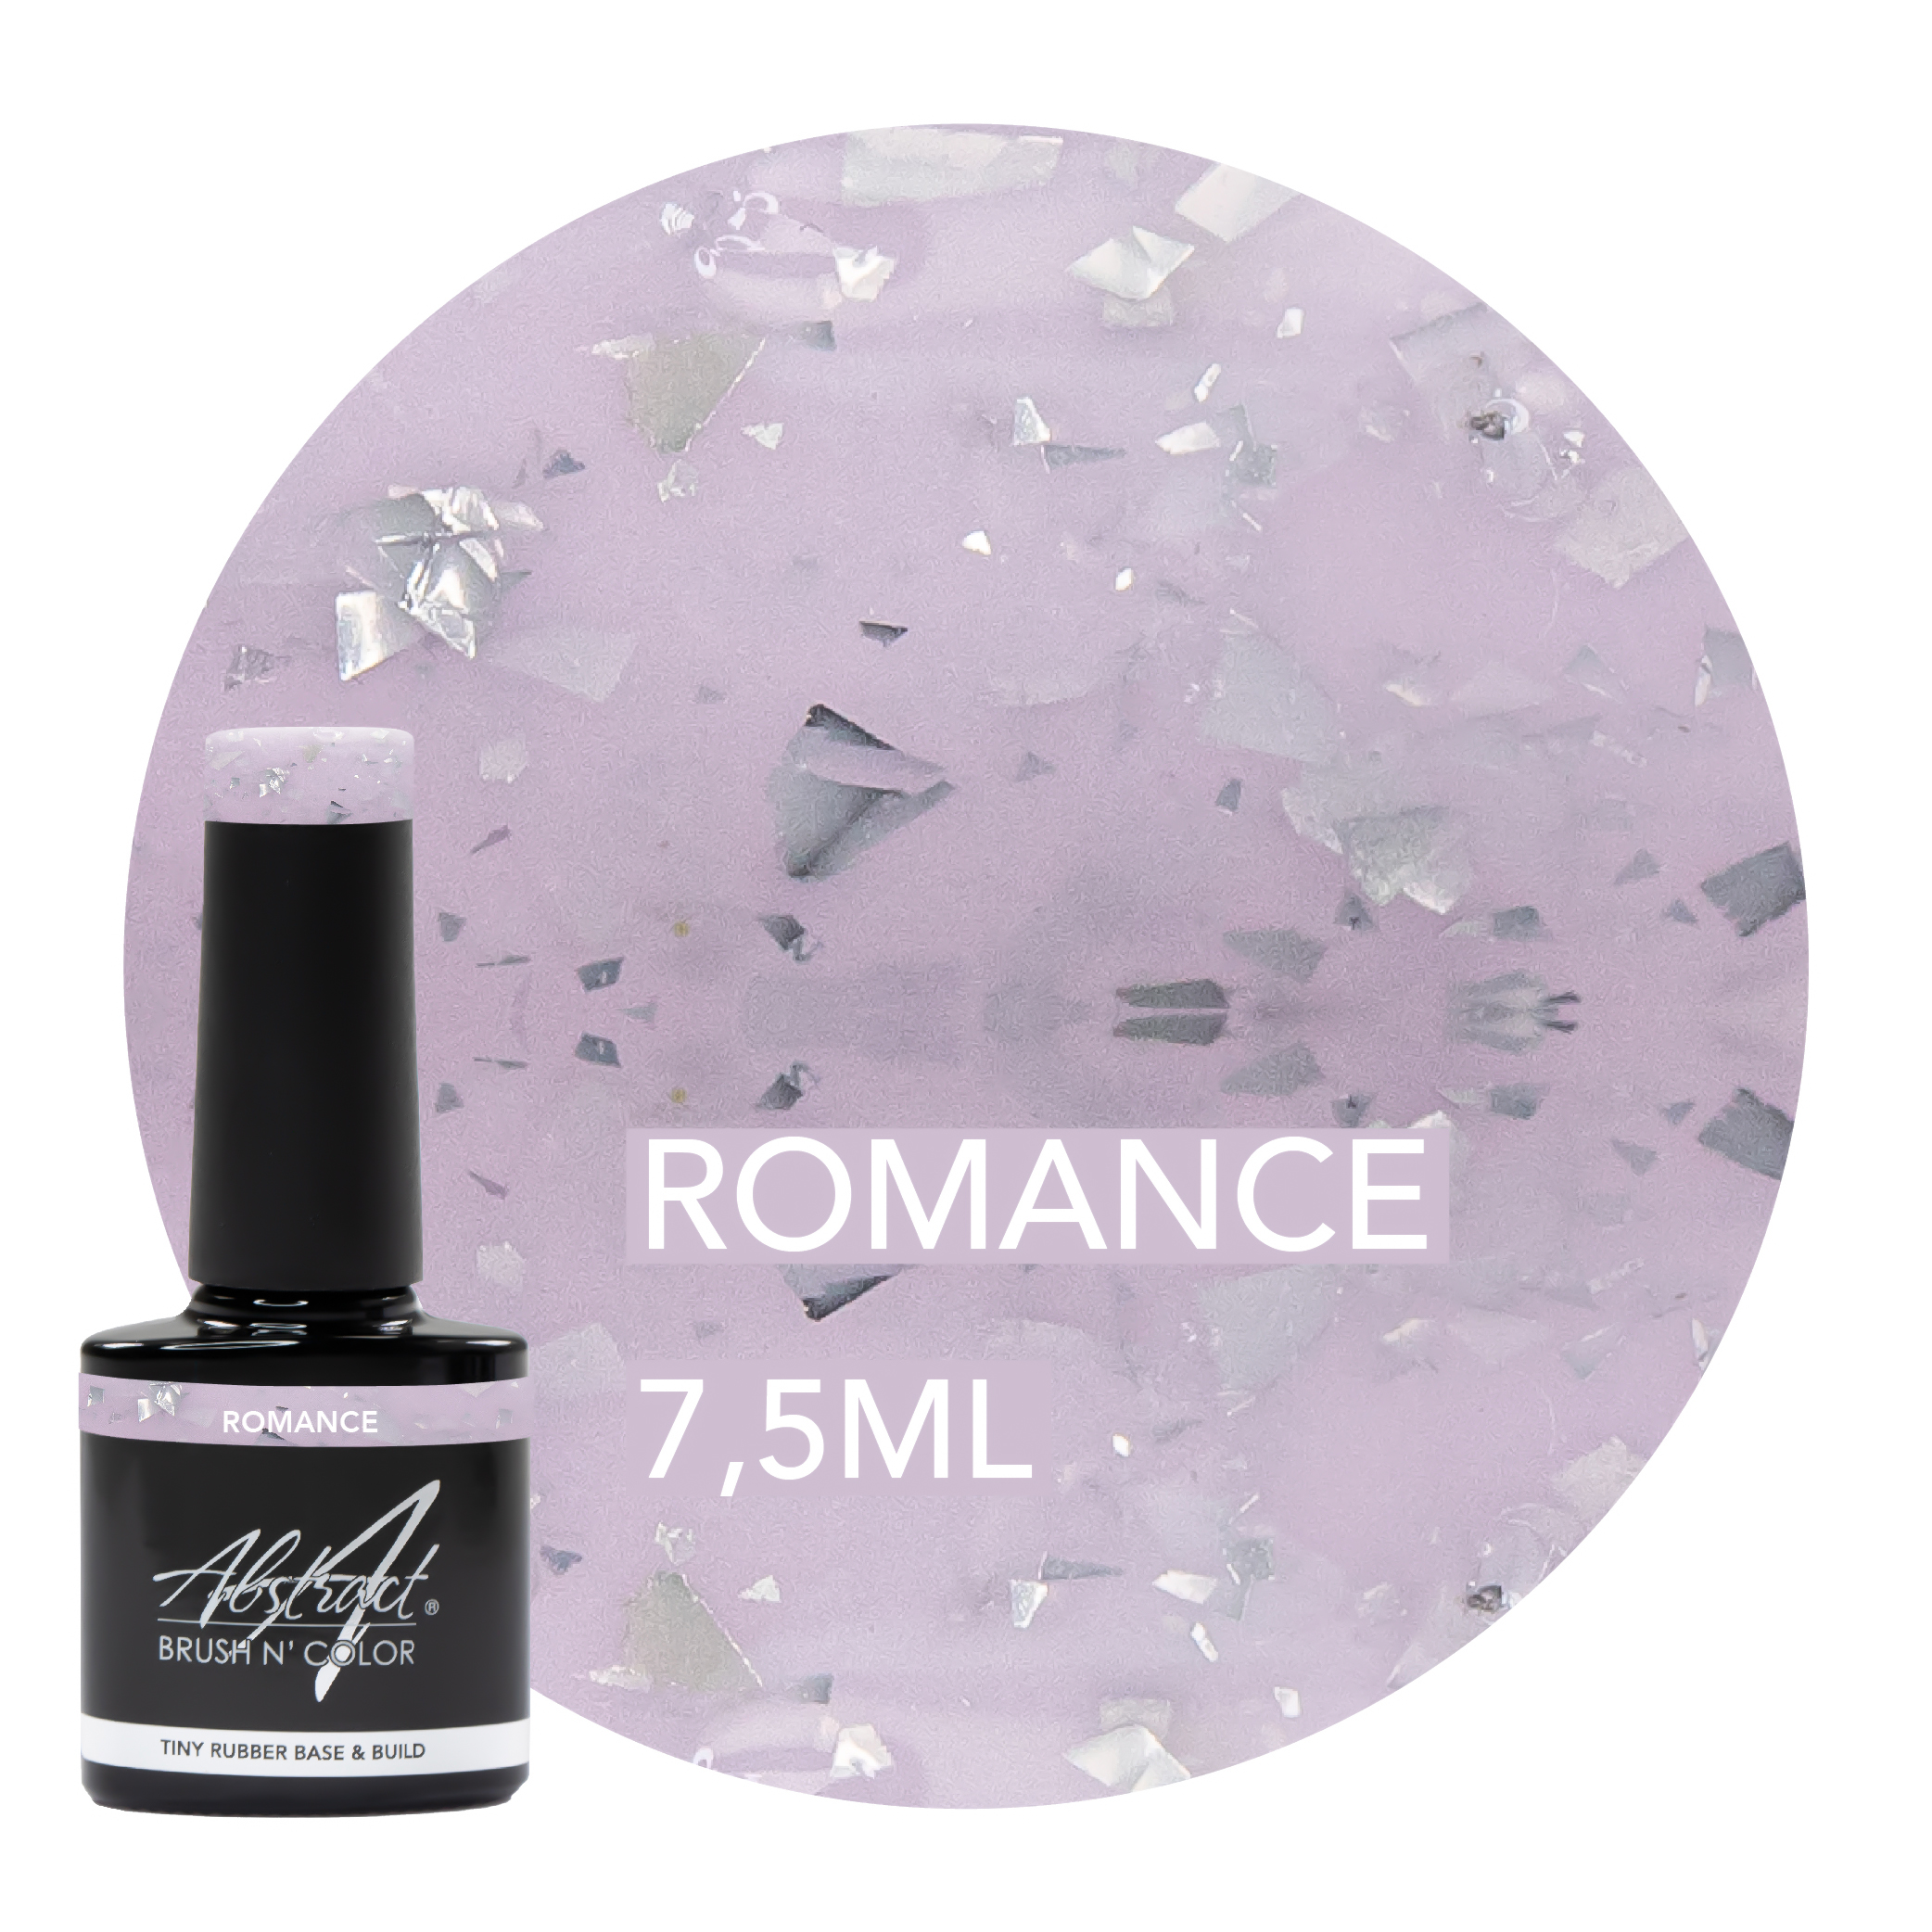 Rubber Base & Build Dazzling Romance 7,5ml, Abstract | 151027